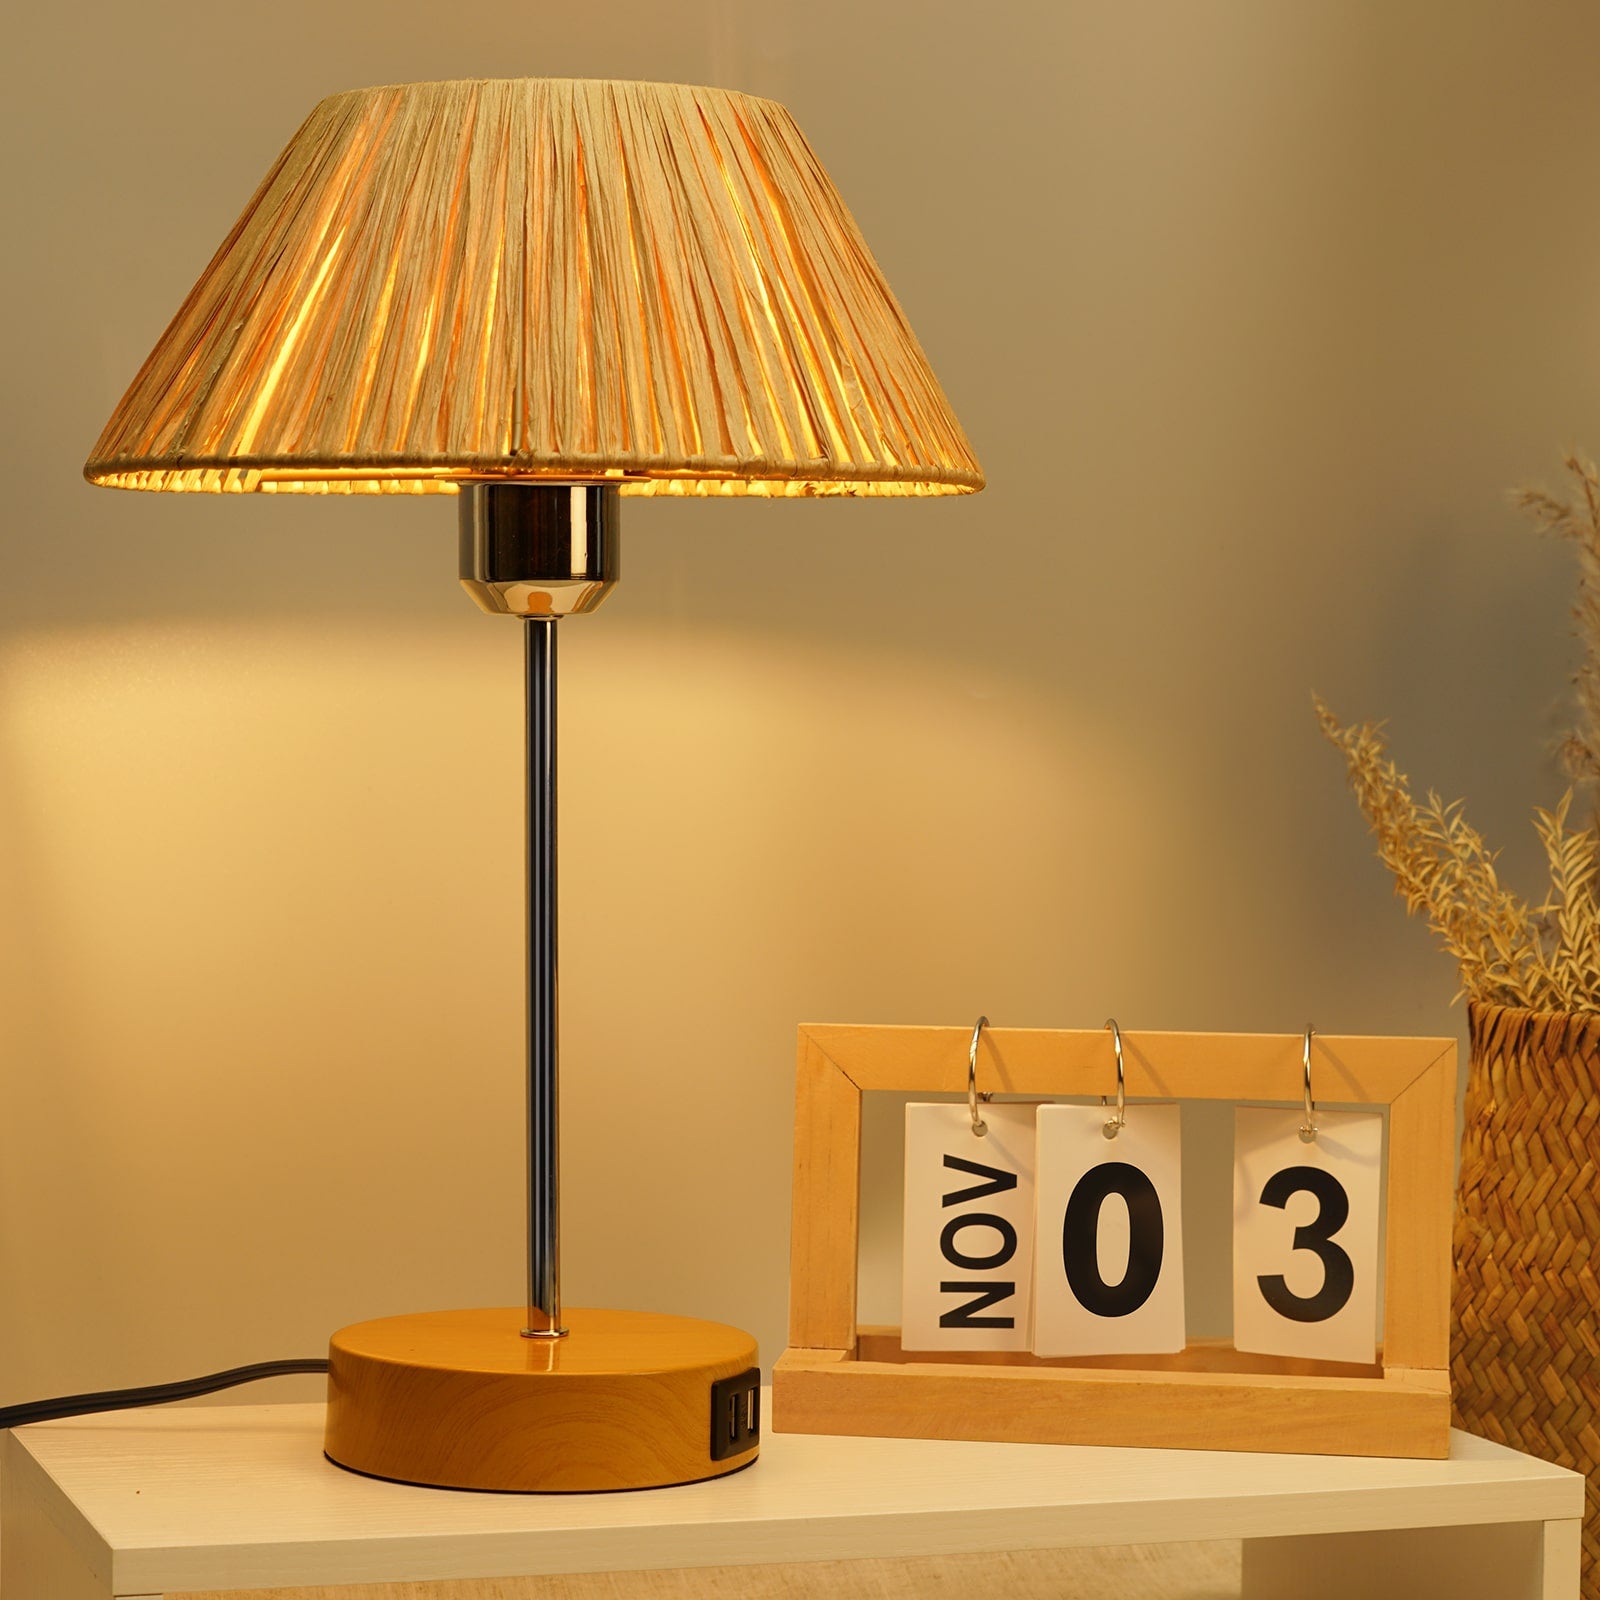 N09 Boho Table Lamp with Straw Rope Shade 3 Way Dimmable & USB Charging Port